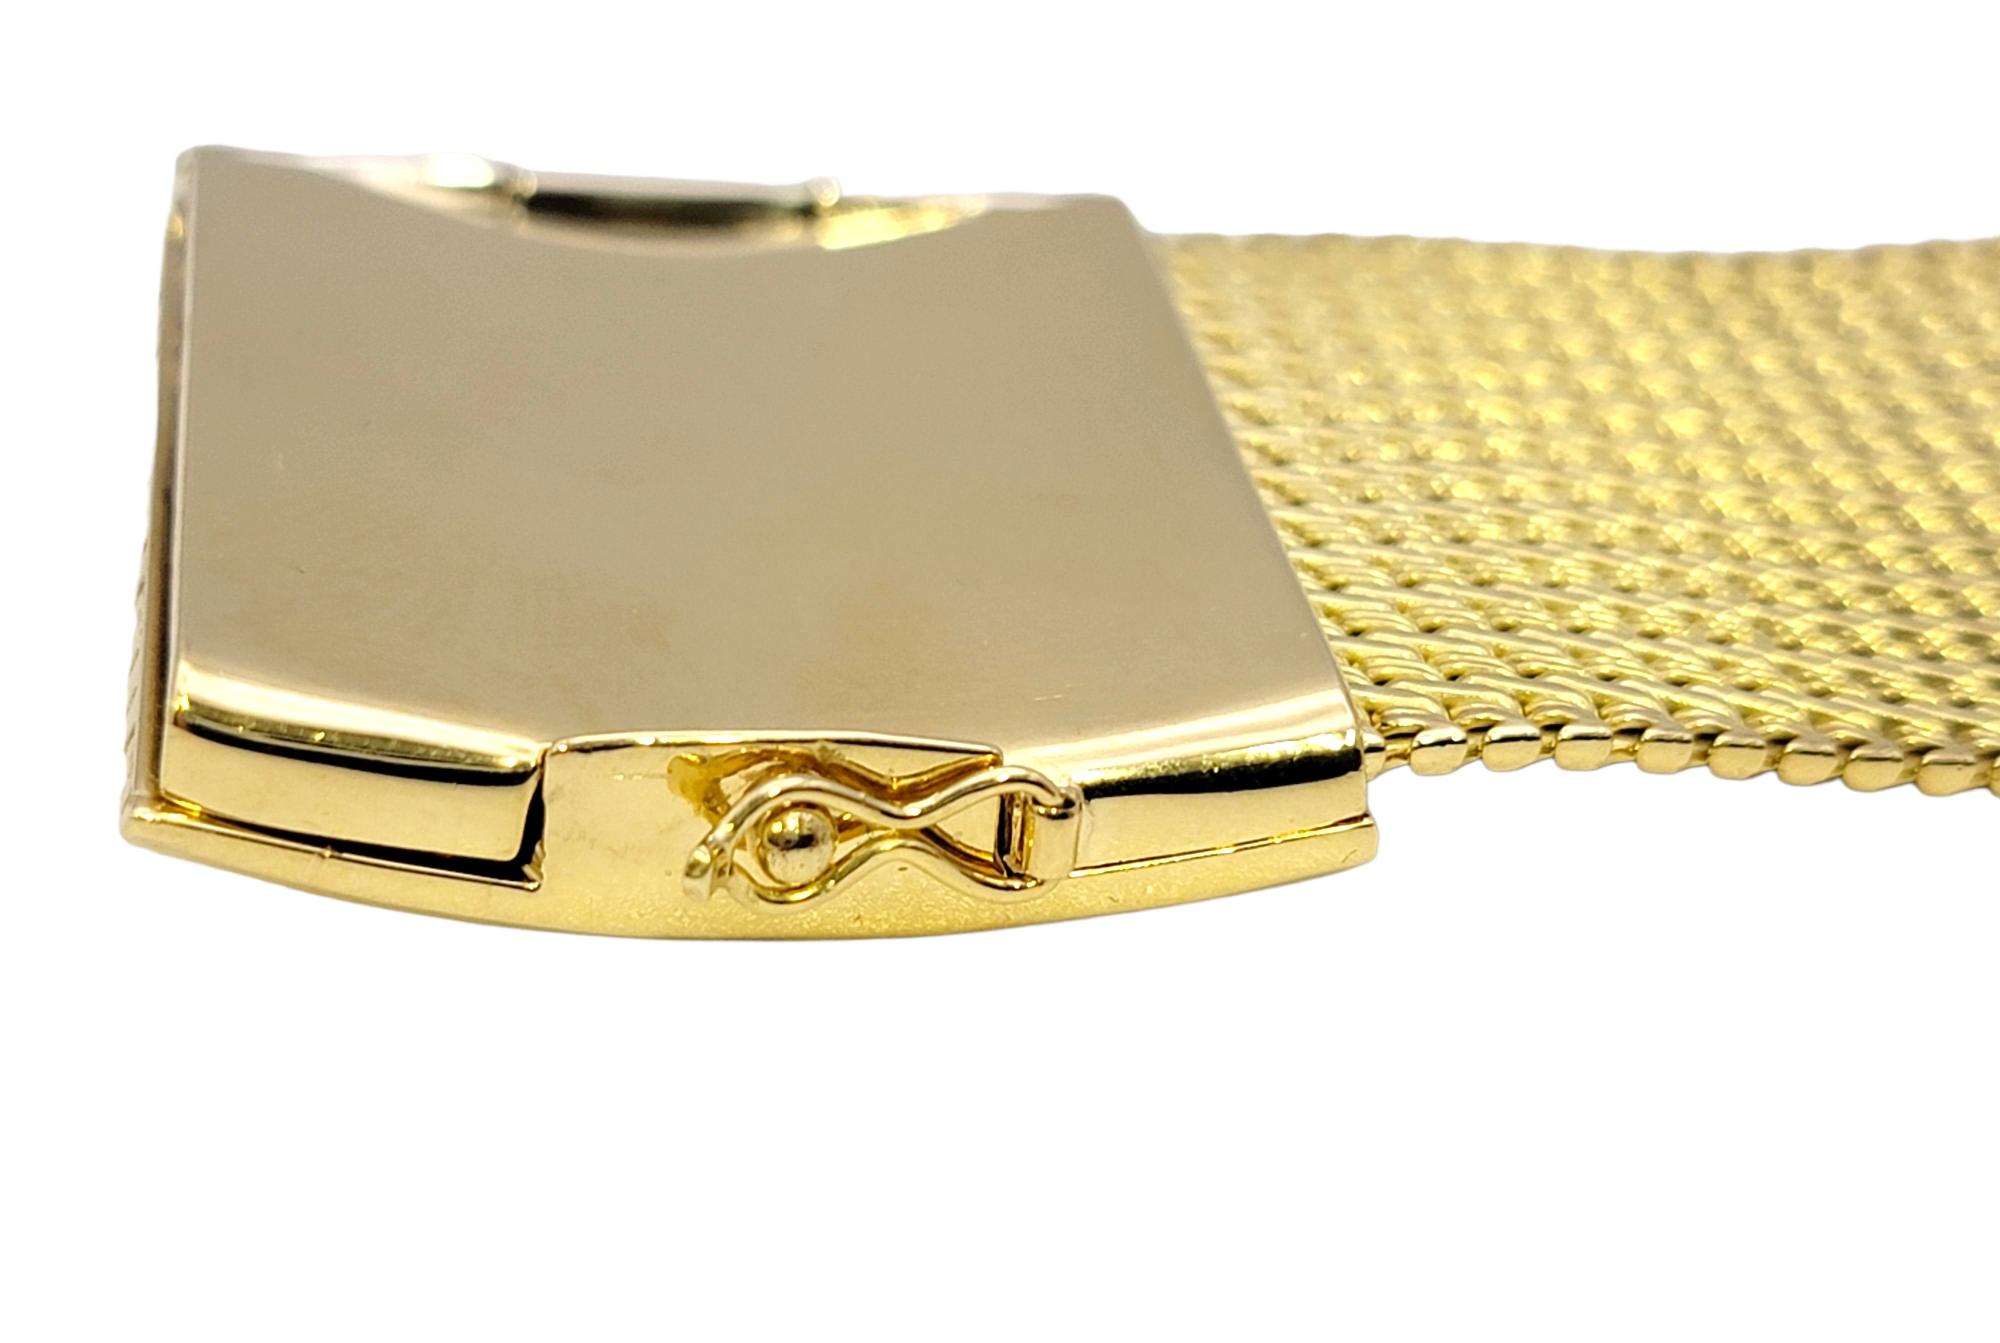 Vintage Textured 18 Karat Yellow Gold Wide Mesh Bracelet with Big Square Clasp For Sale 4